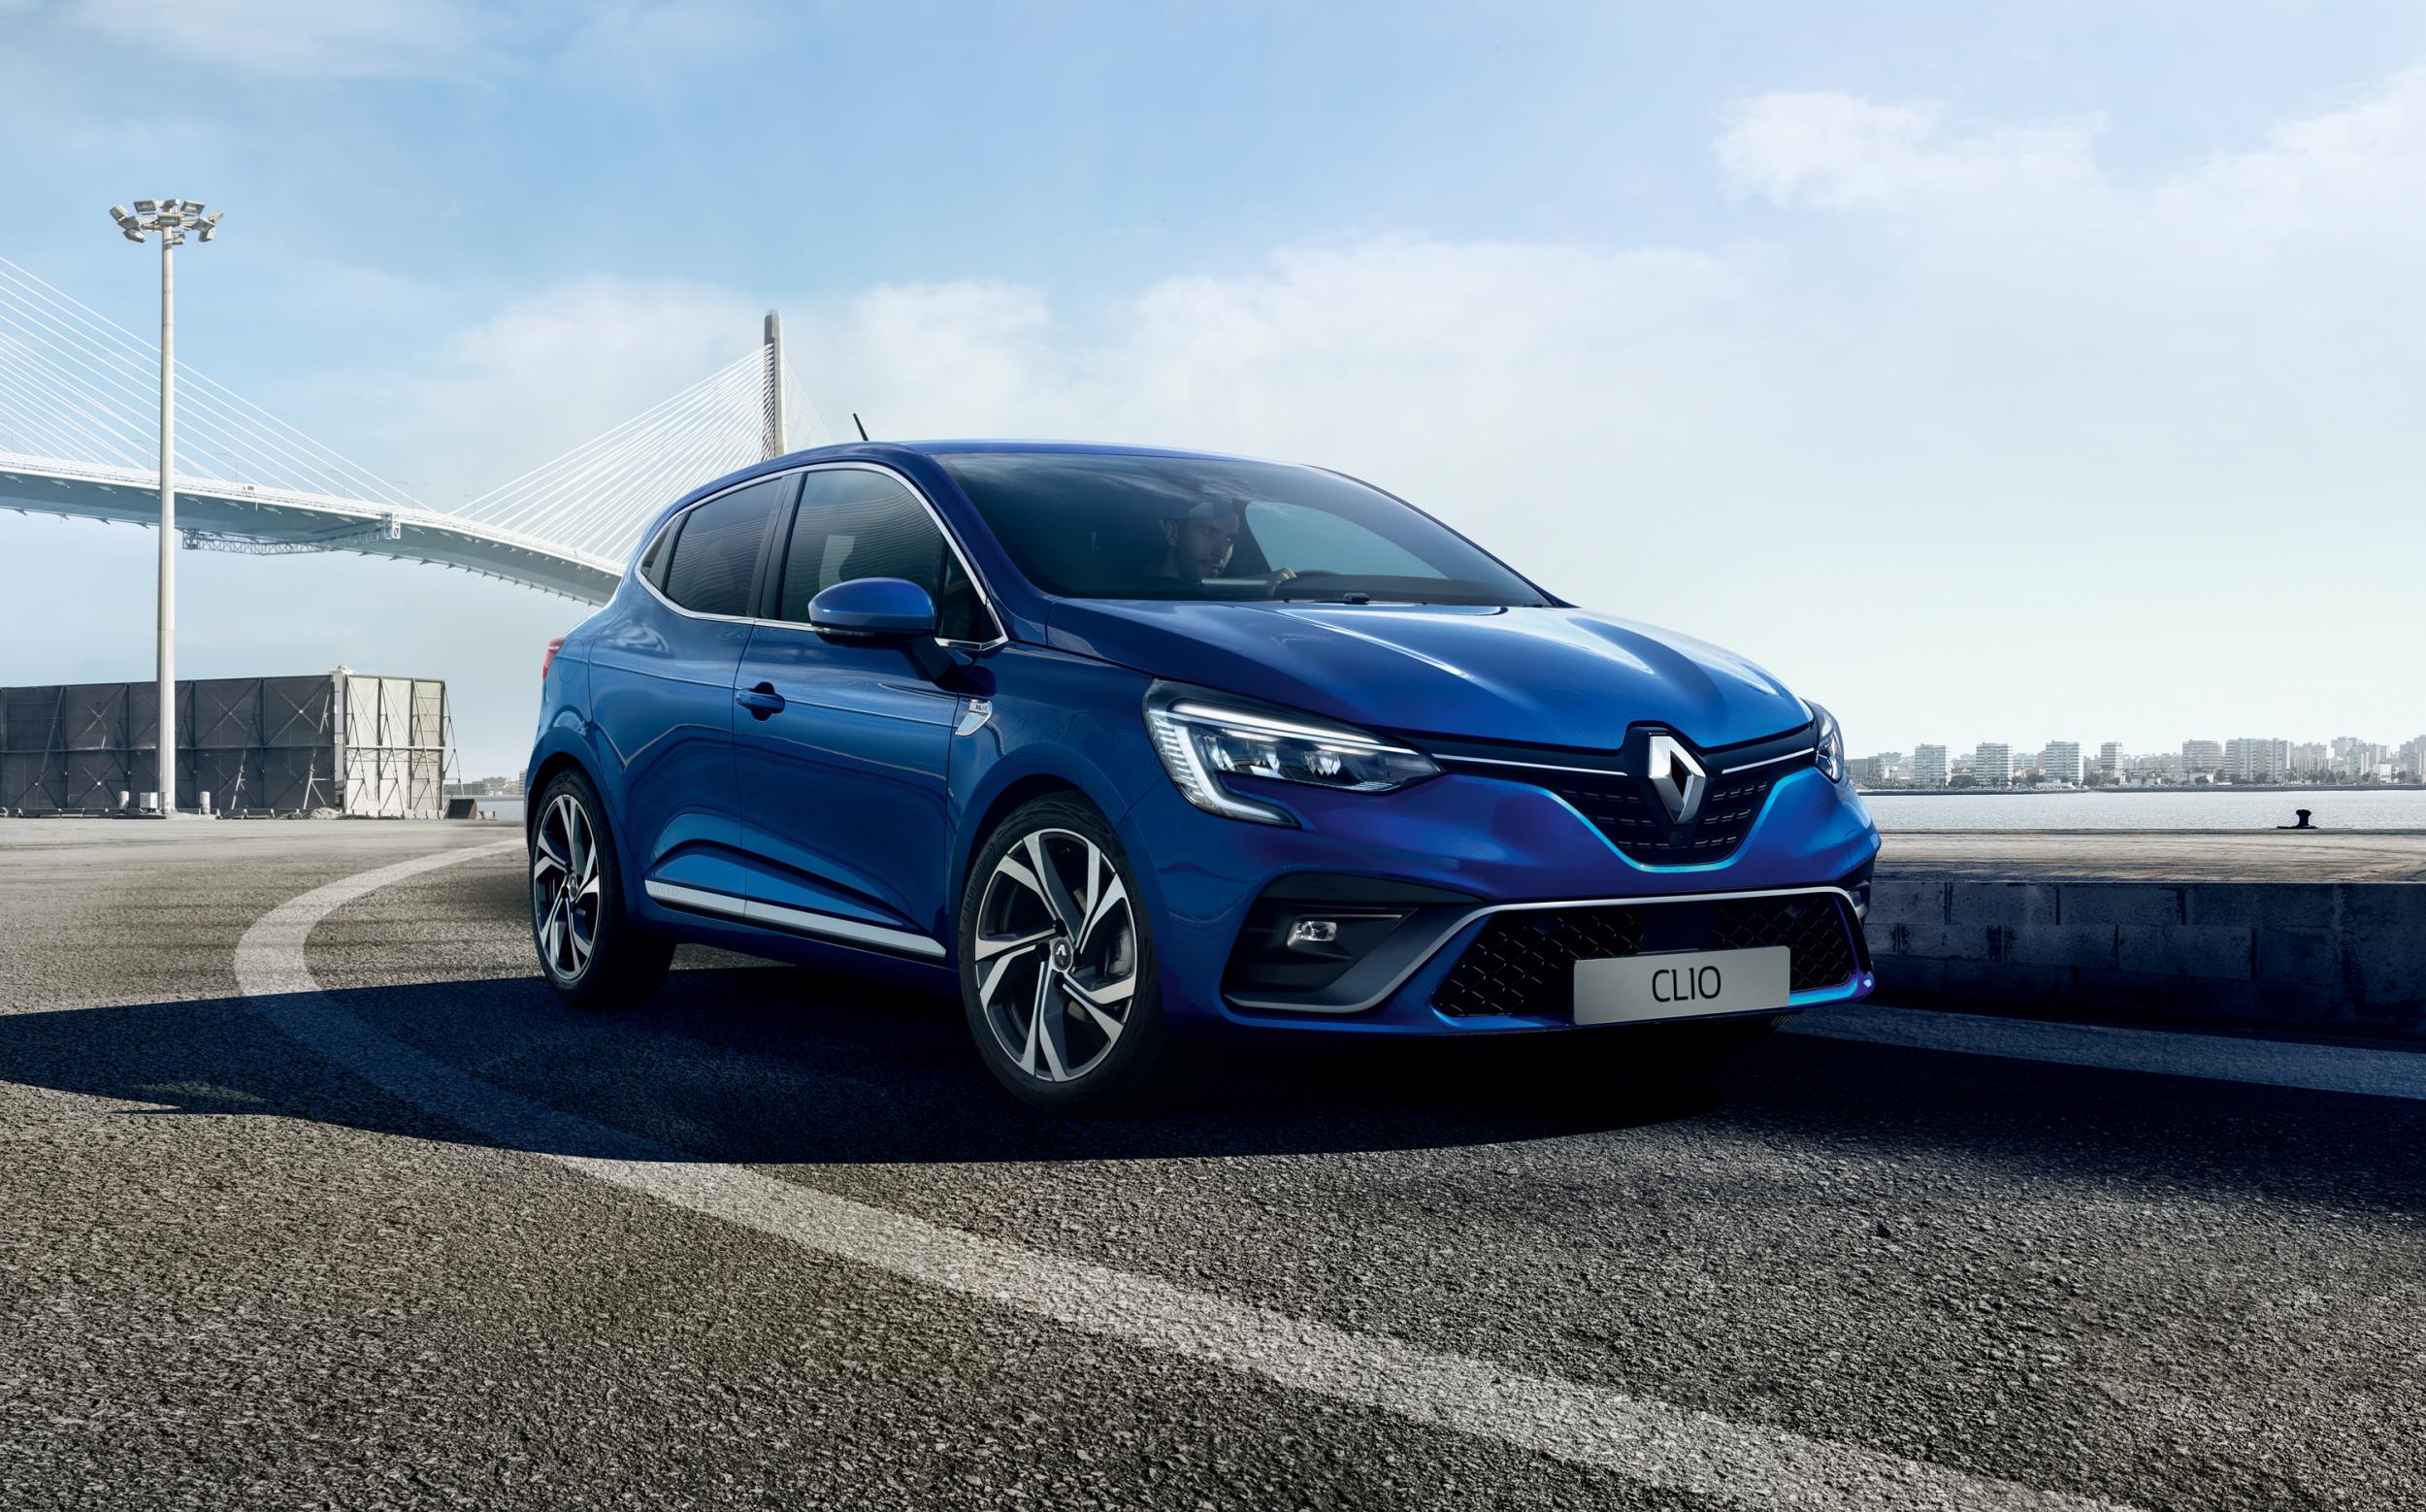 Car review: Renault Clio Iconic has va va for improvement | The Independent | The Independent